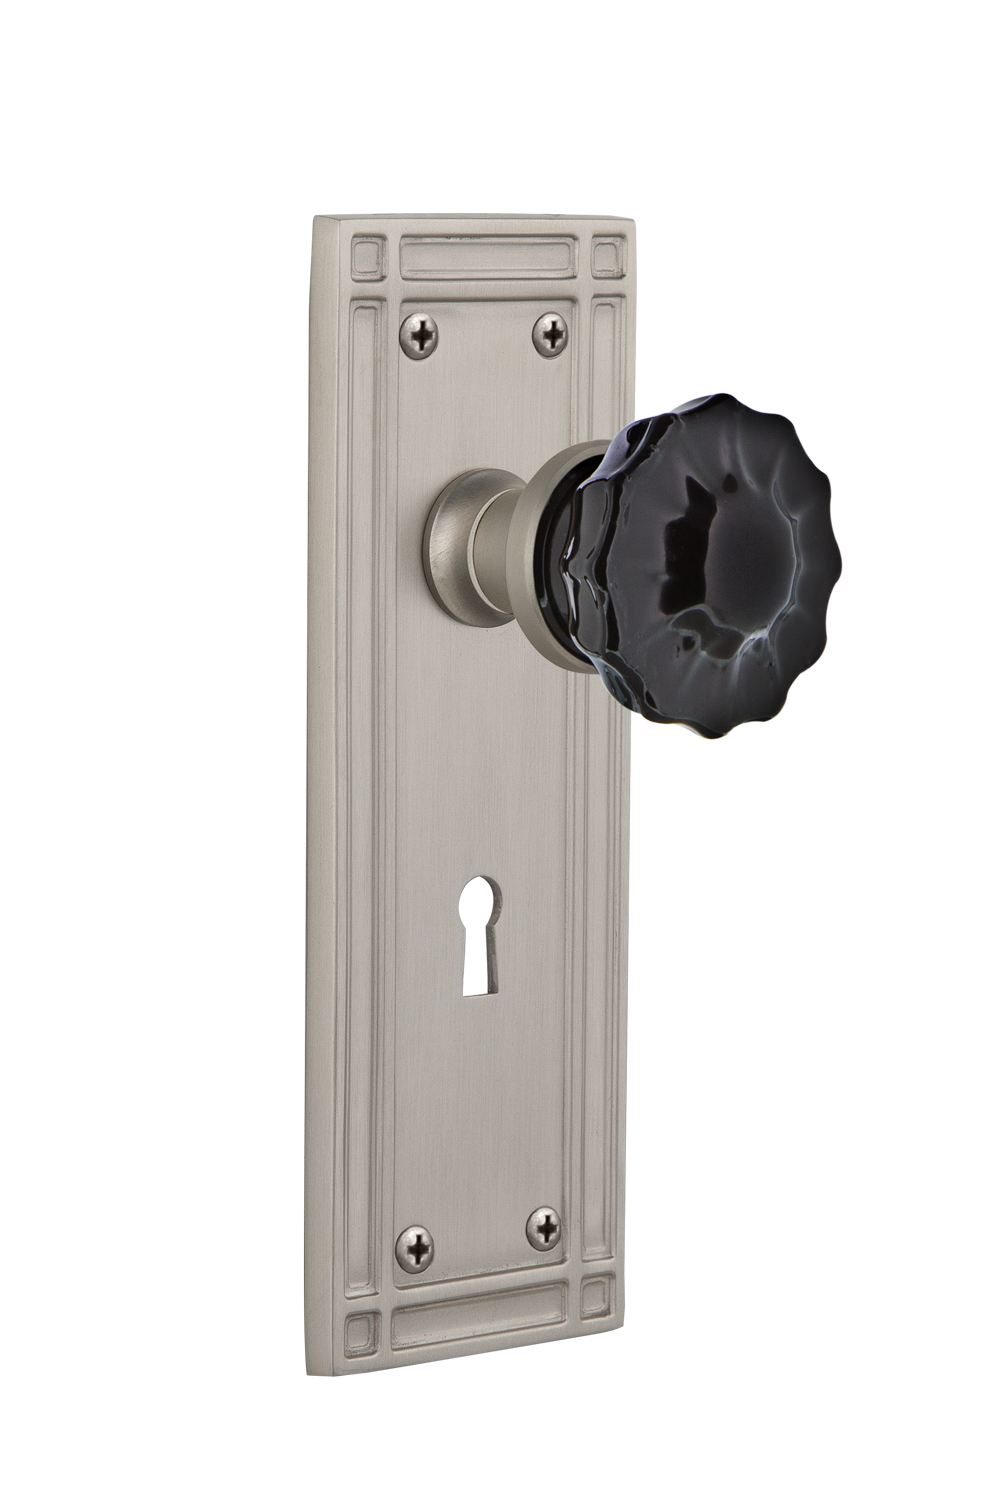 Nostalgic Warehouse 727490 Mission Plate Interior Mortise Crystal Black Glass Door Knob in Satin Nickel 2.25 with Keyhole 